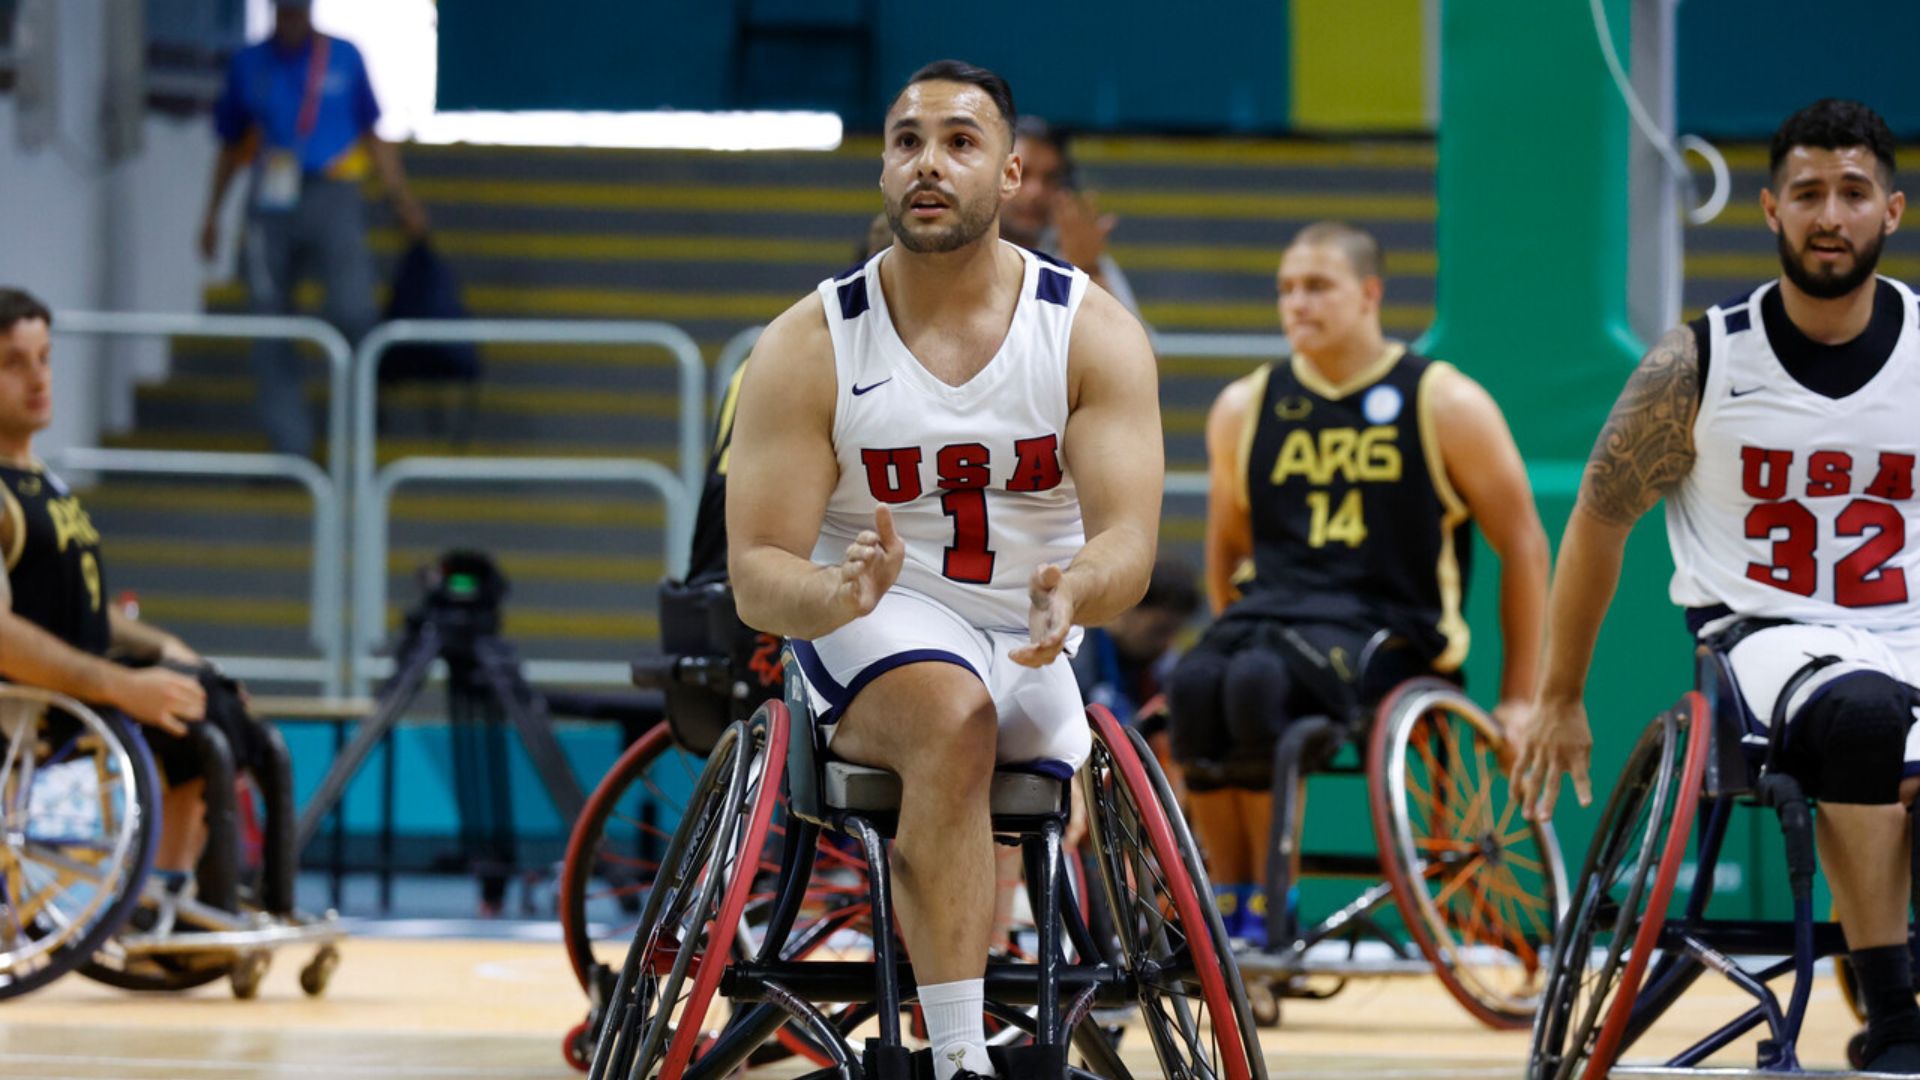 United States is In the Wheelchair Basketball Final